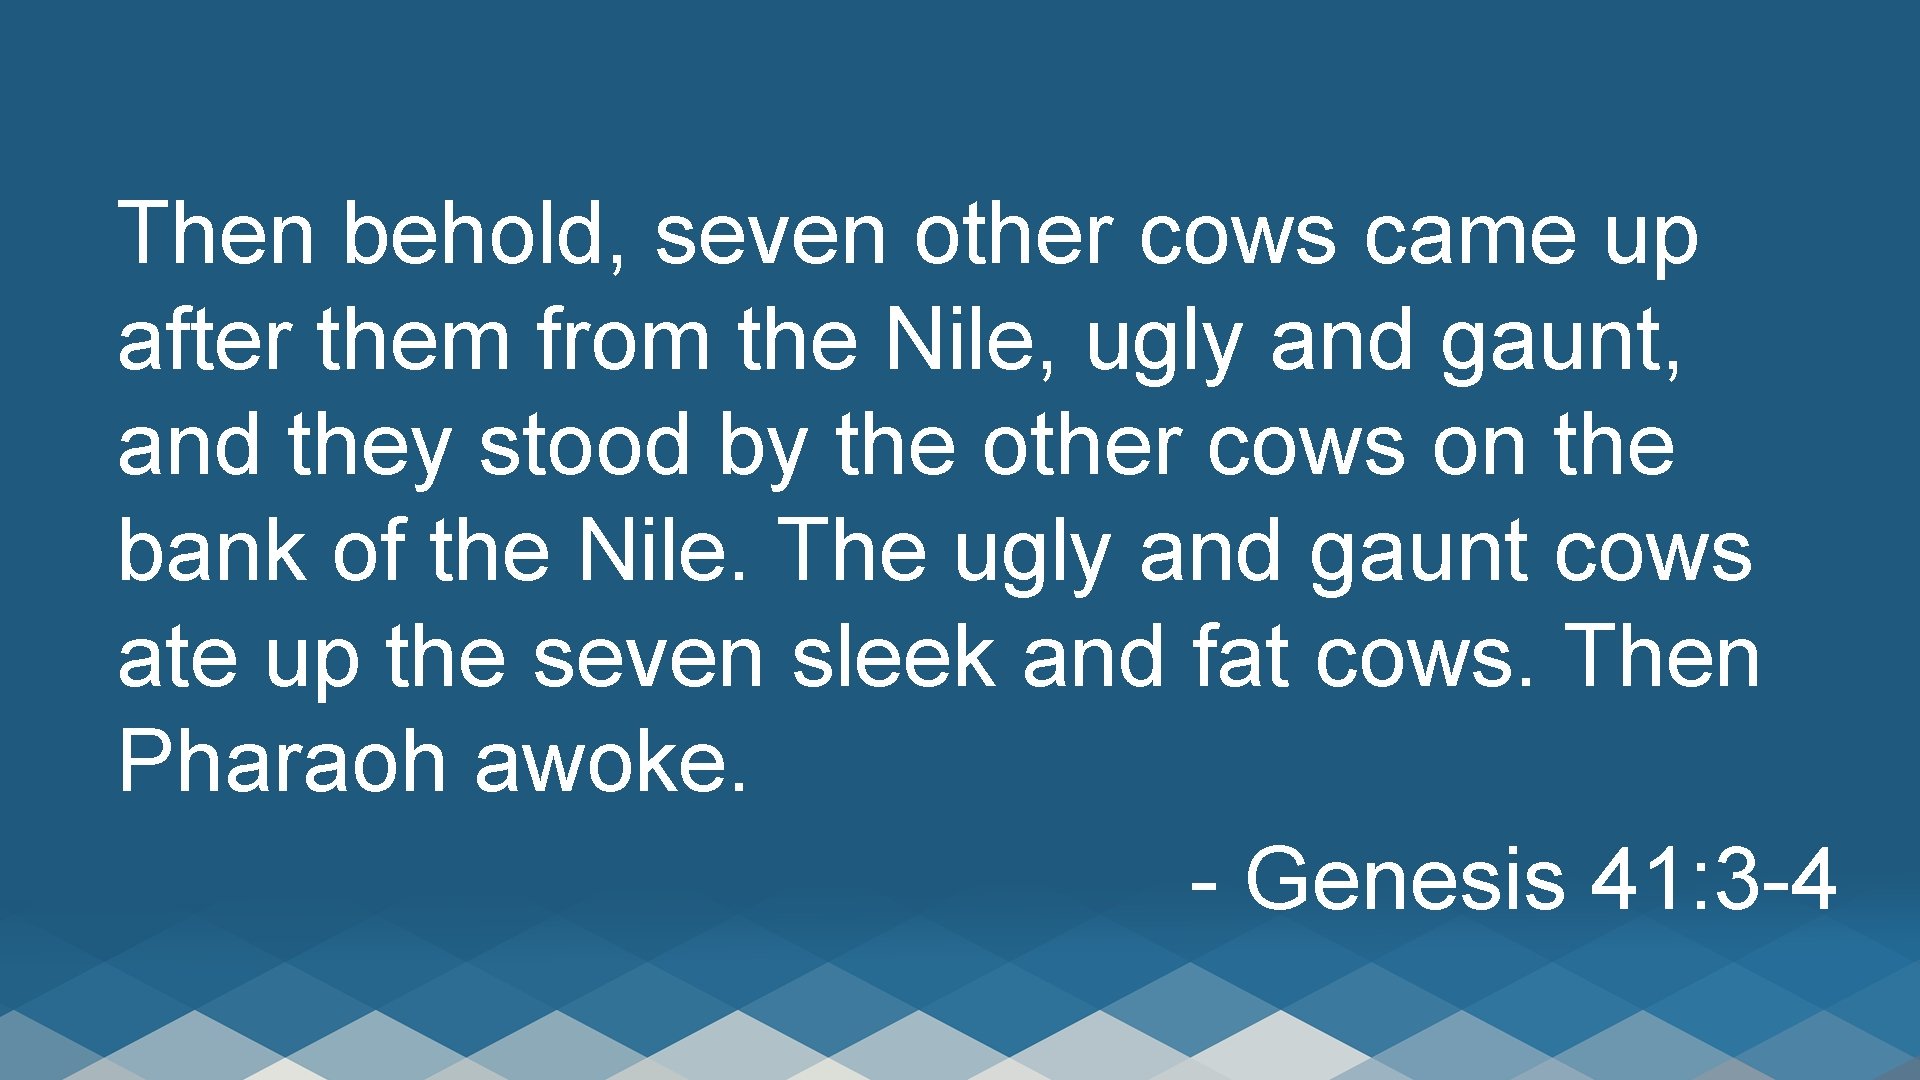 Then behold, seven other cows came up after them from the Nile, ugly and